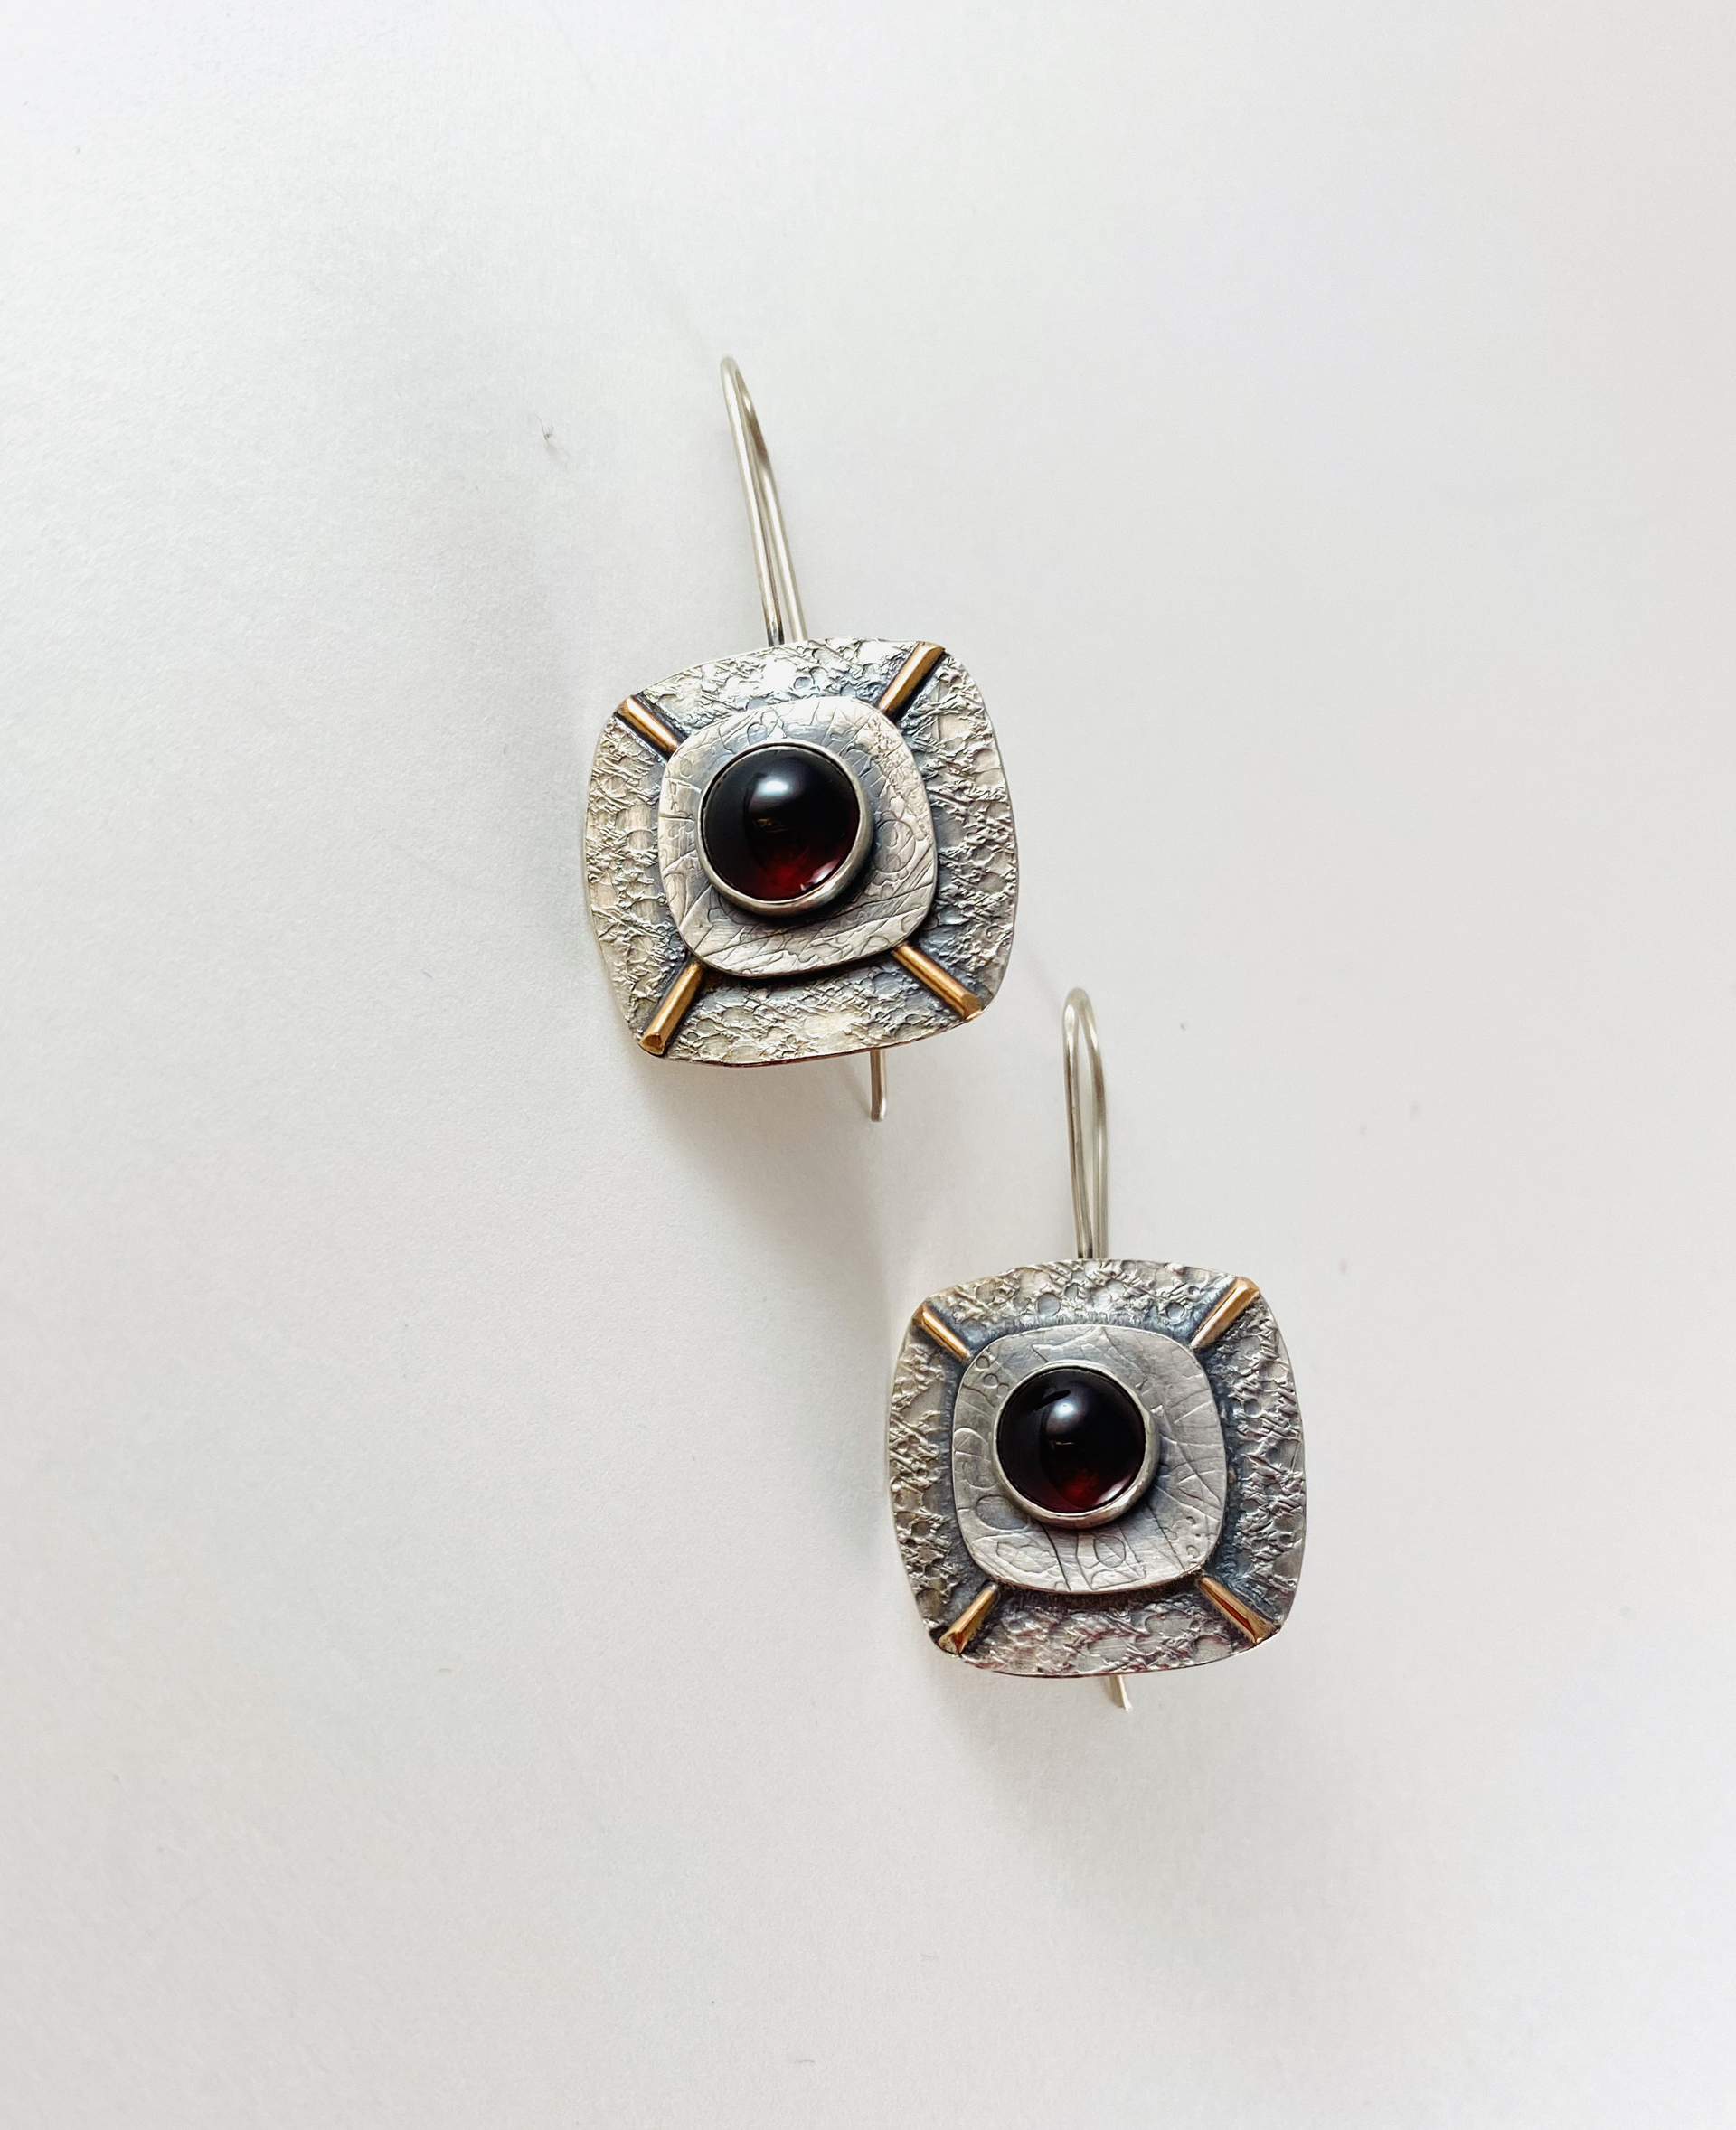 Hand Stamped Sterling Garnet Cabochon Earrings AB20-10 by Anne Bivens